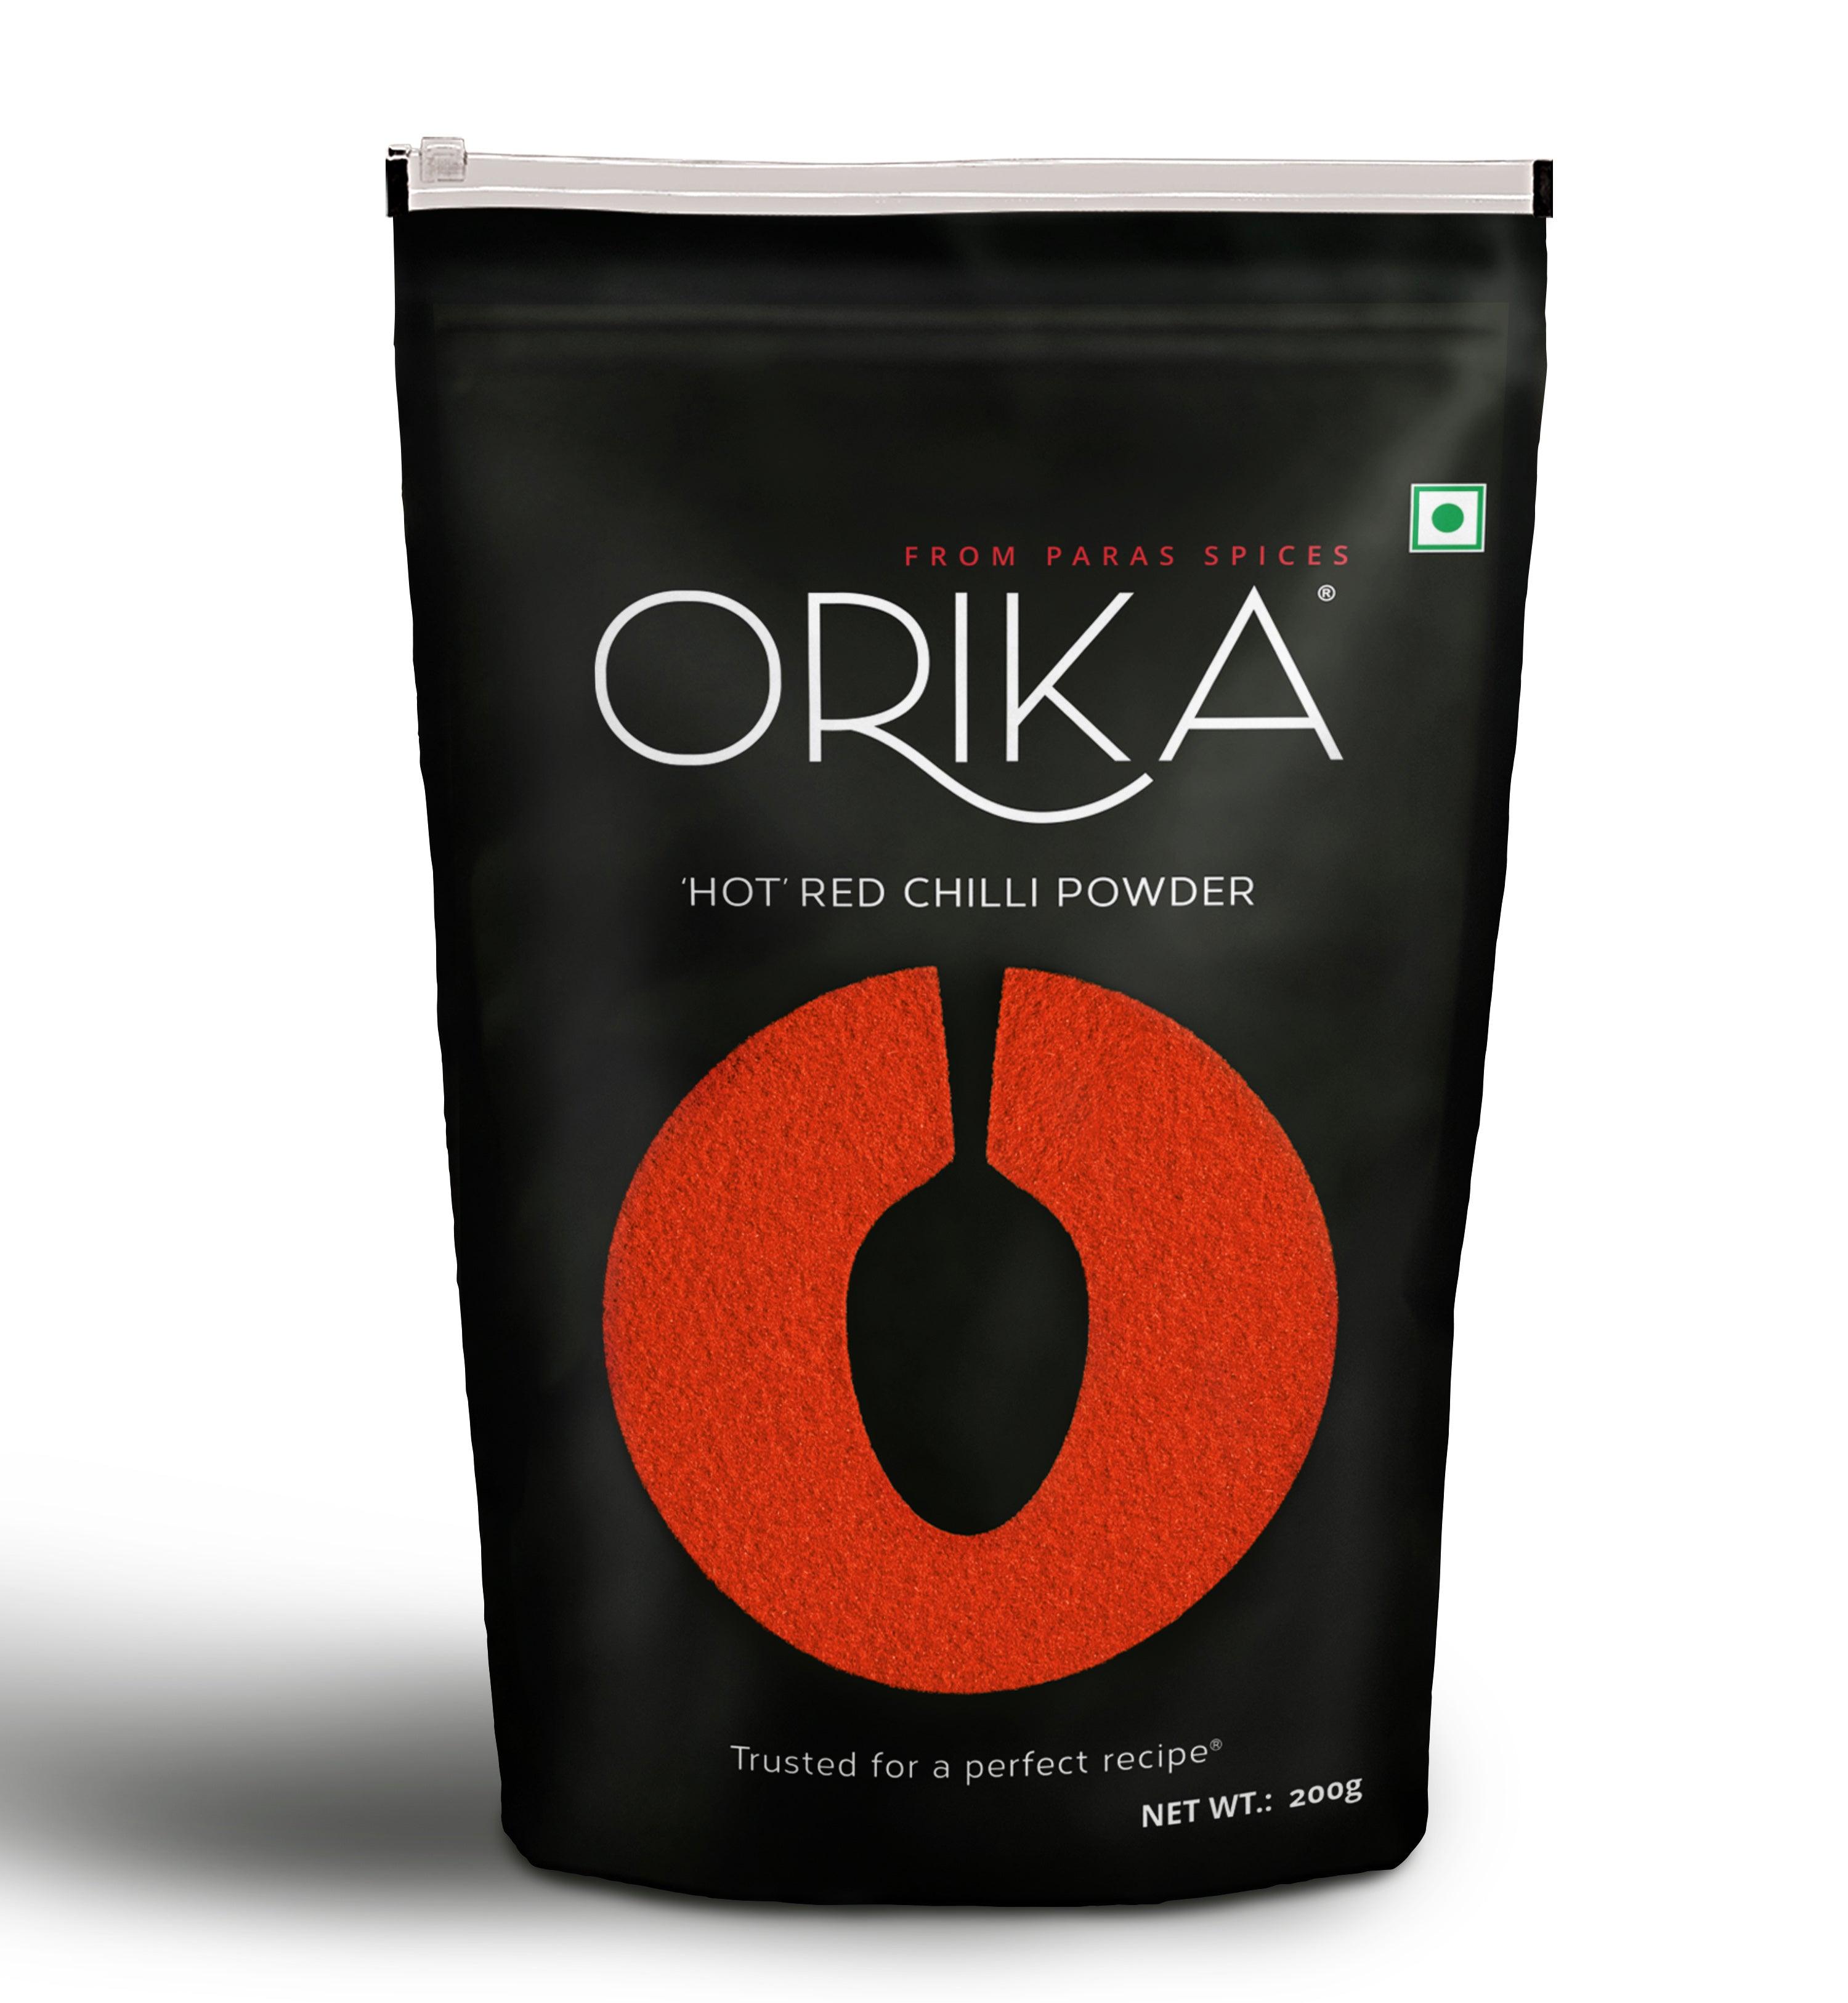 Hot Red Chilli Powder (100 gm, 200gm, 500gm) - Orika Spices India